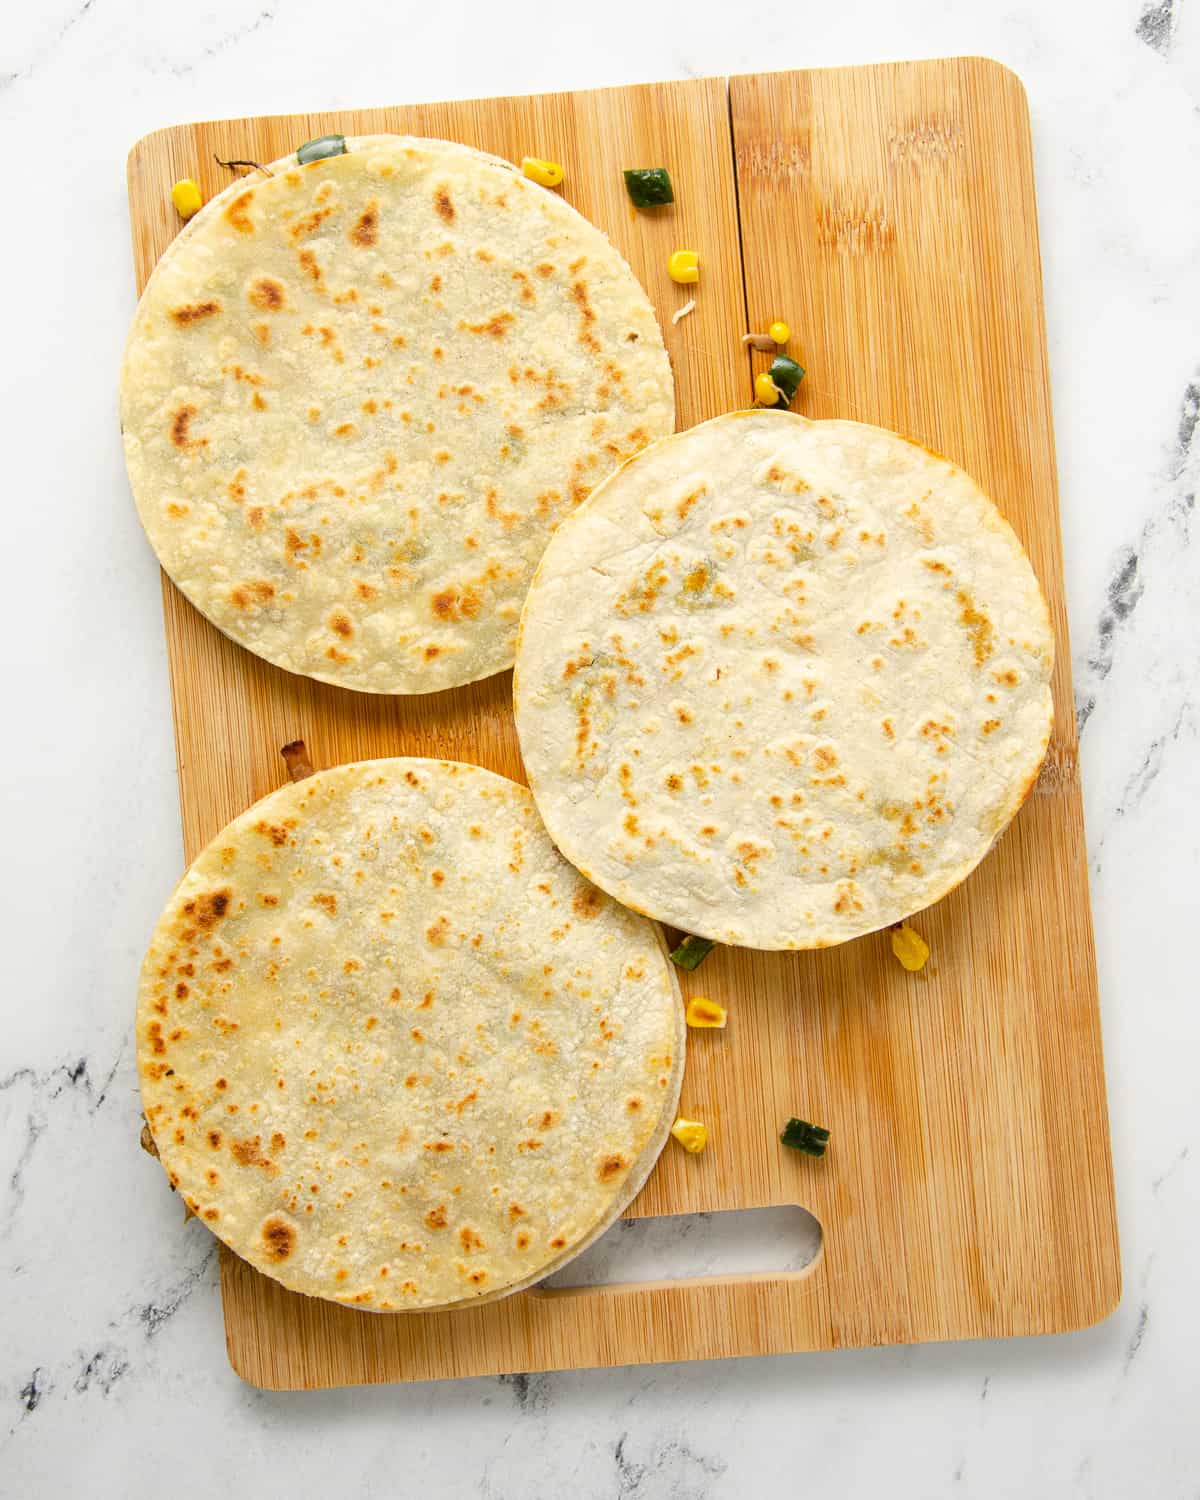 Three quesadillas cooked through on a cutting board ready to cut into pieces.